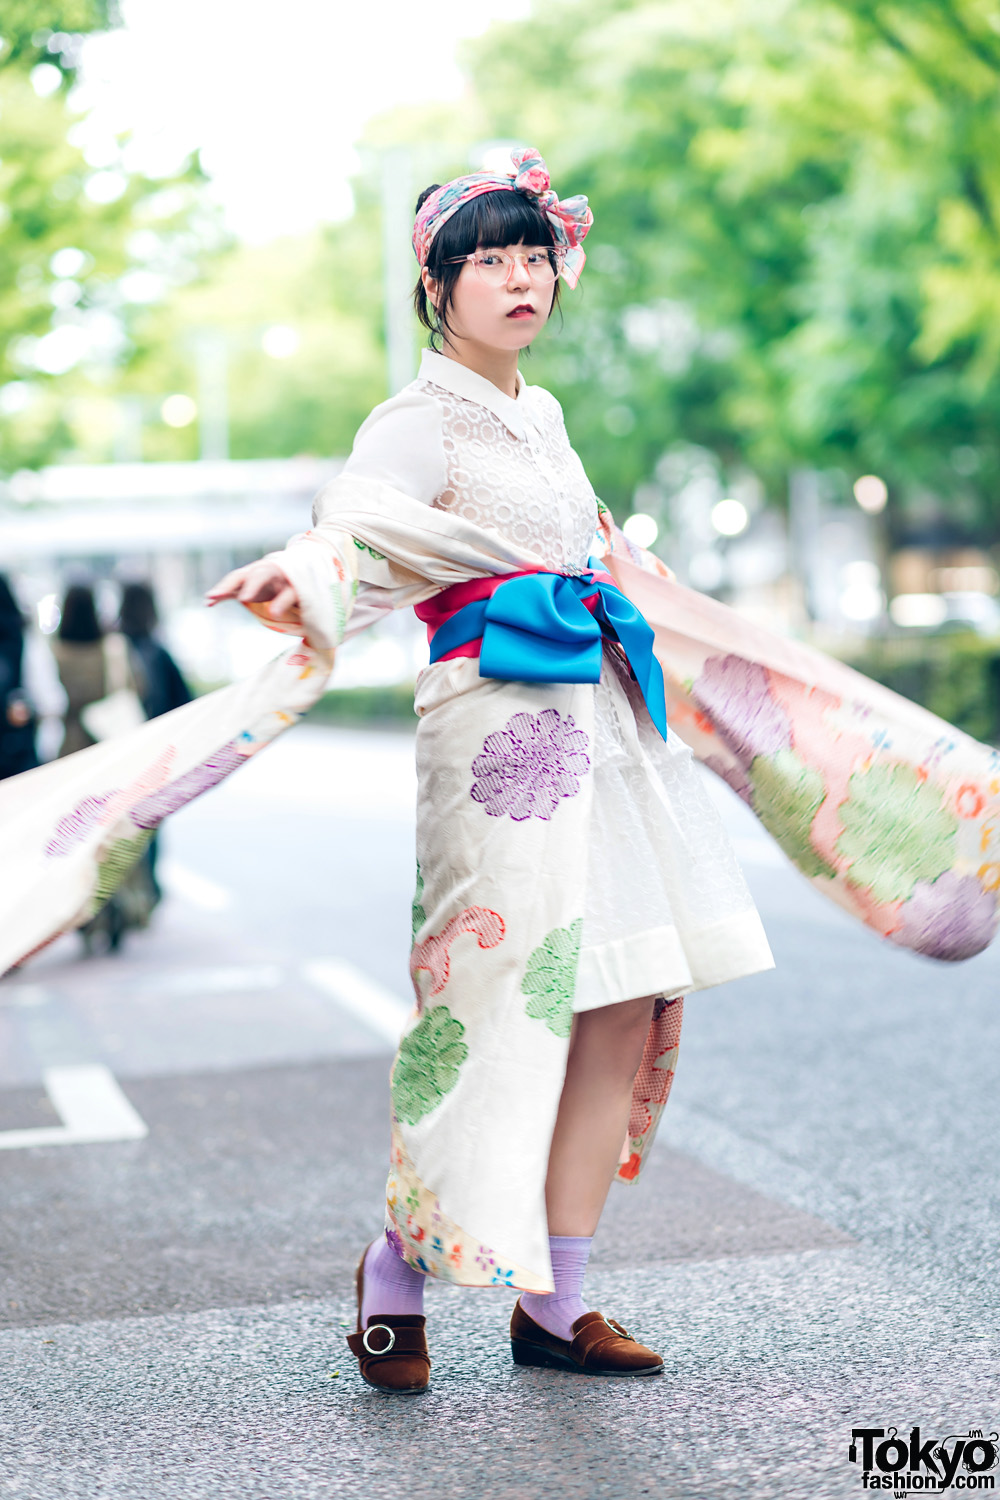 Vintage Japanese Kimono Street Style w/ Printed Headscarf, Sheer Blouse & Oriental Traffic Pointy Loafers